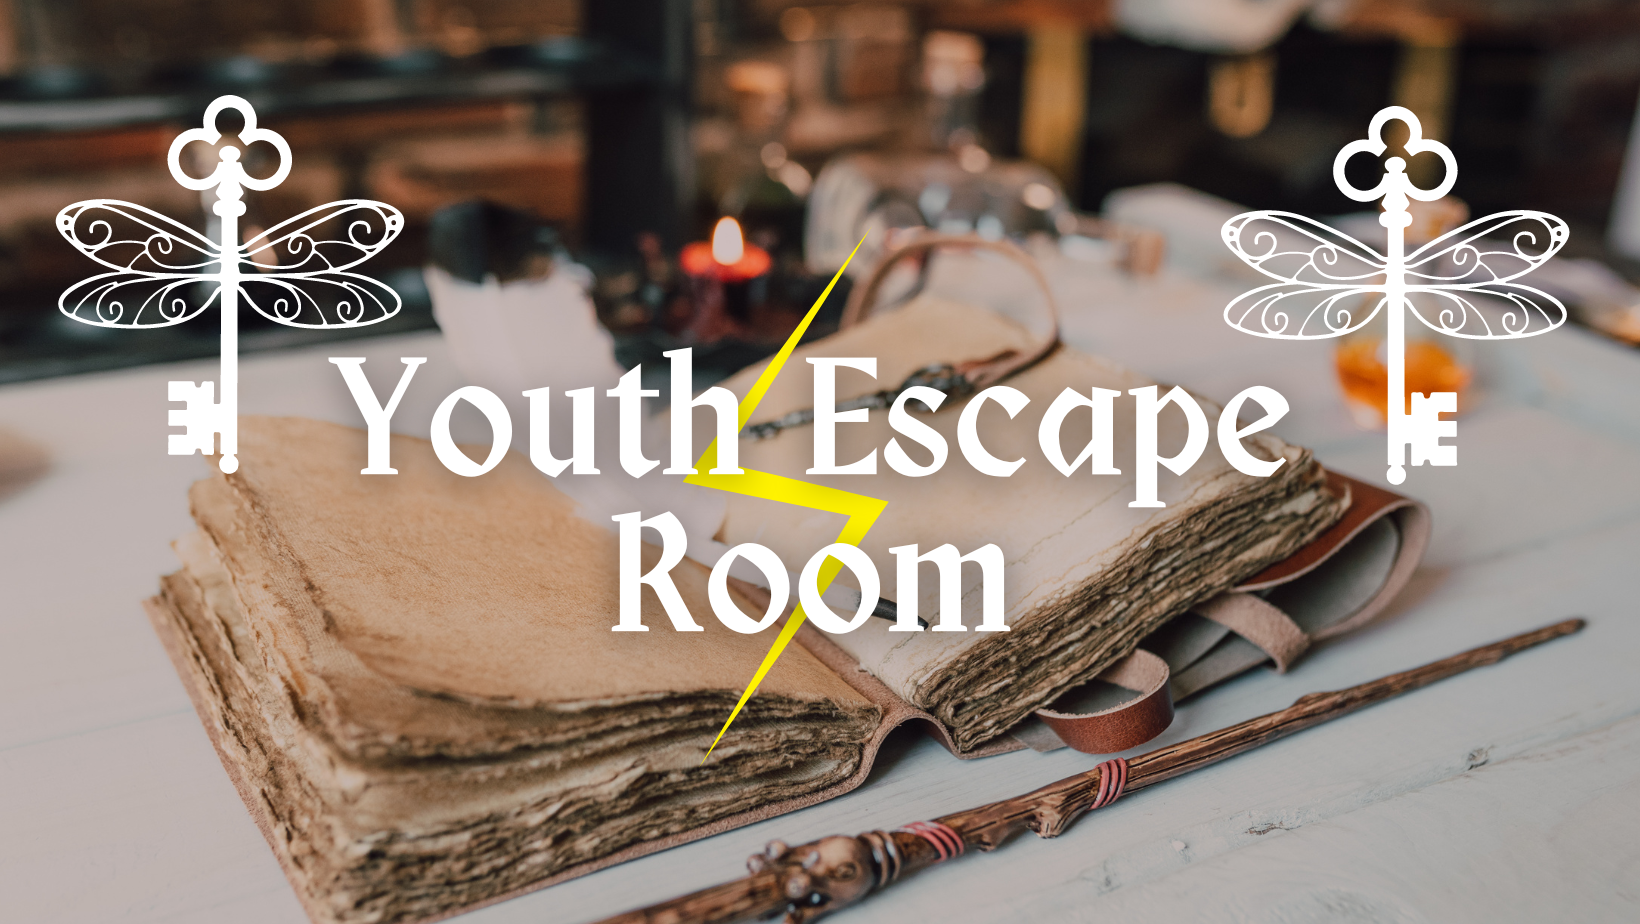 Youth Escape Room spellbook and wand on table